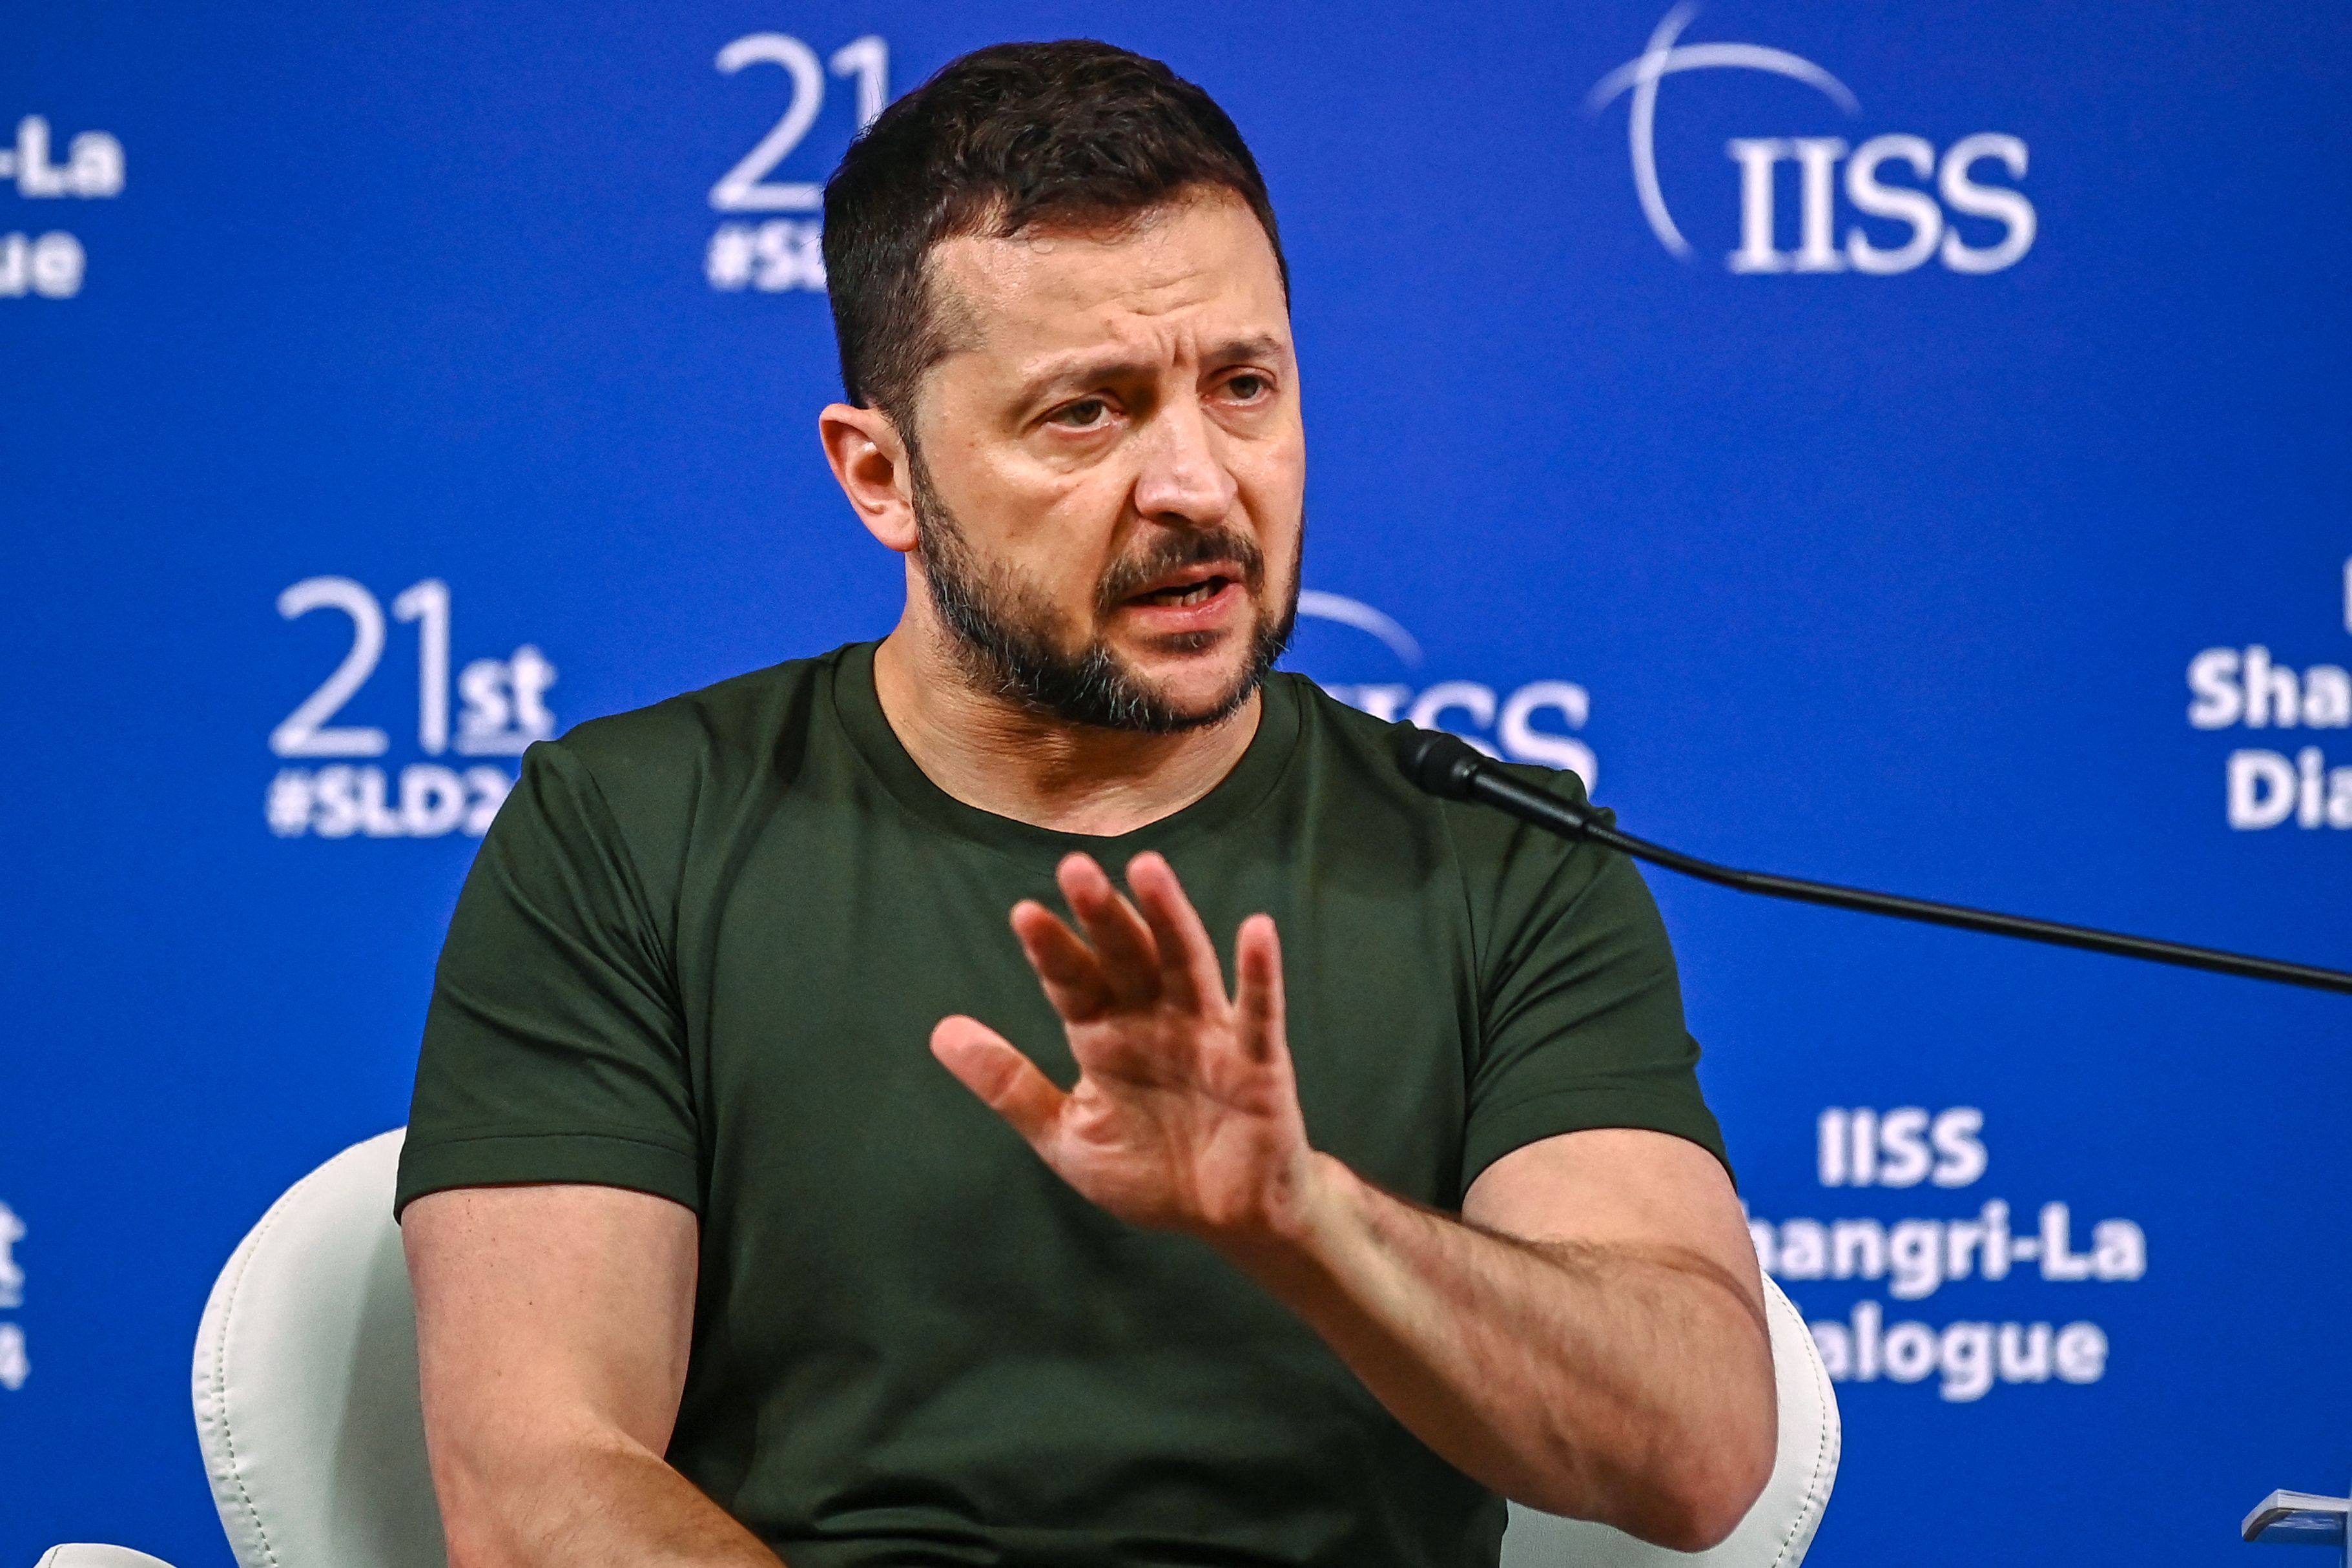 Ukraine’s President Volodymyr Zelensky criticised China’s stance on the Russian invasion at the Shangri-La Dialogue in Singapore on Sunday. Photo: AFP